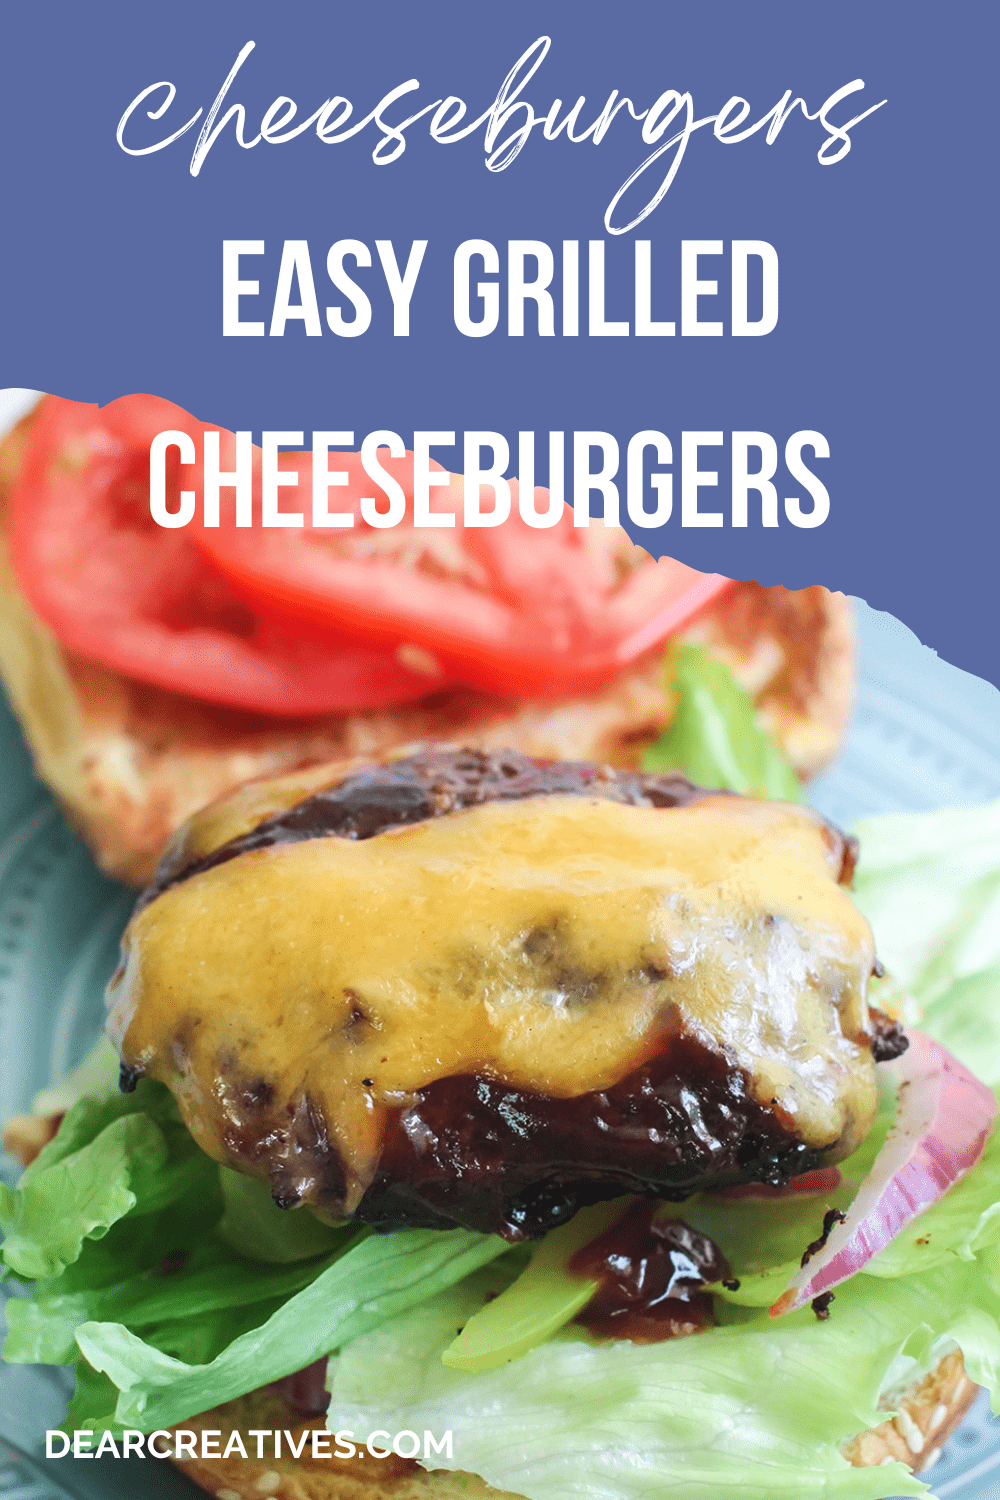 Burgers with melted cheese on a toasted bun - Easy grilled cheeseburgers - Easy steps to get the perfect cheeseburgers. DearCreatives.com